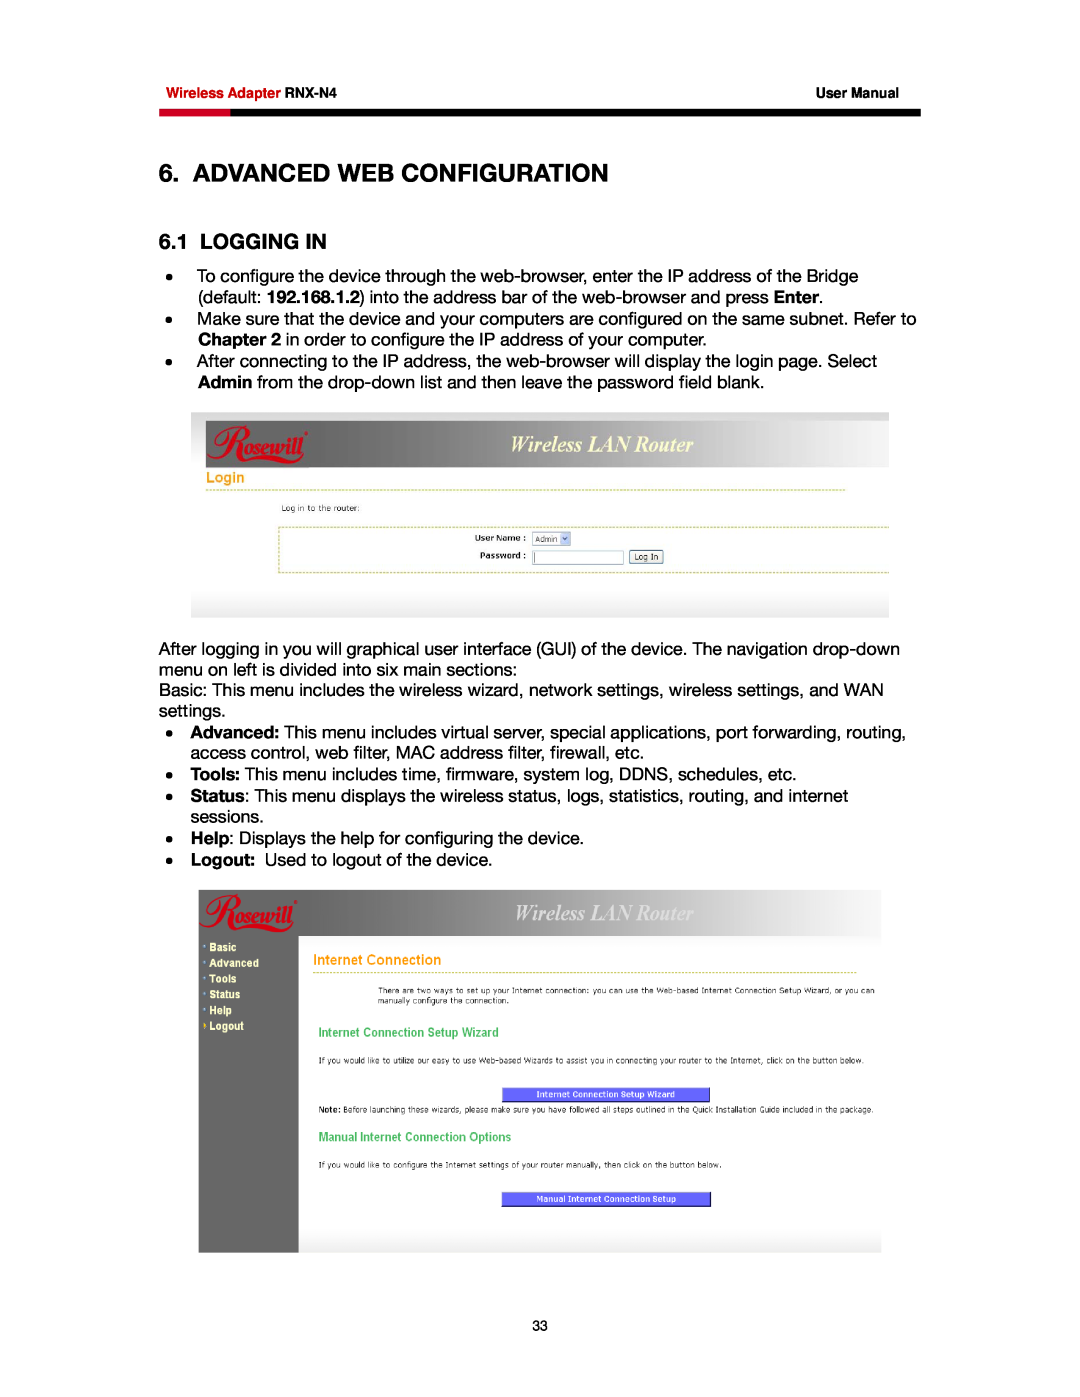 Rosewill RNX-N4 user manual Advanced Web Configuration, Logging In 